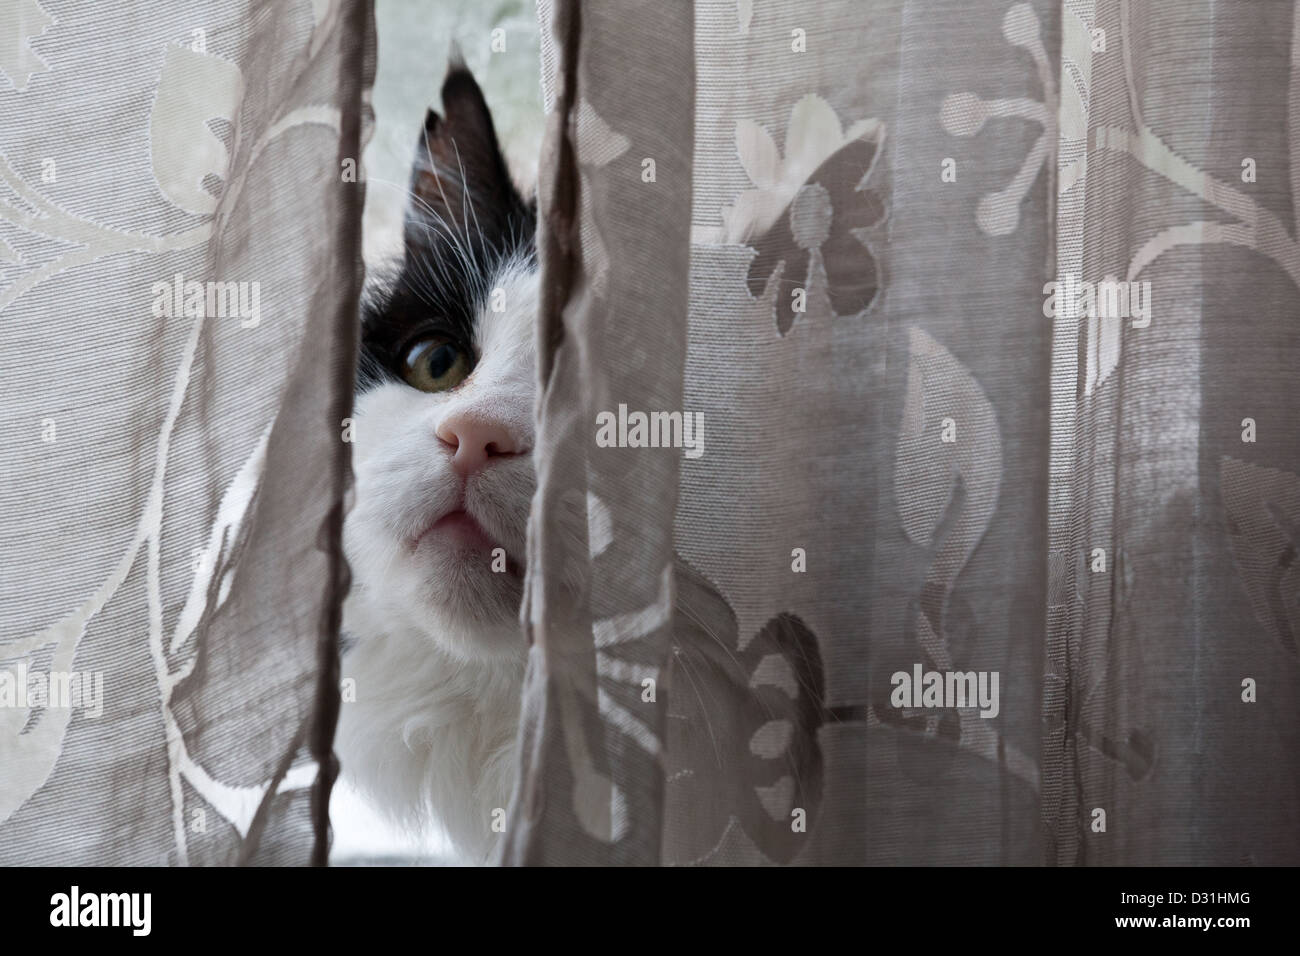 Black and white domestic cat behind curtain. Stock Photo